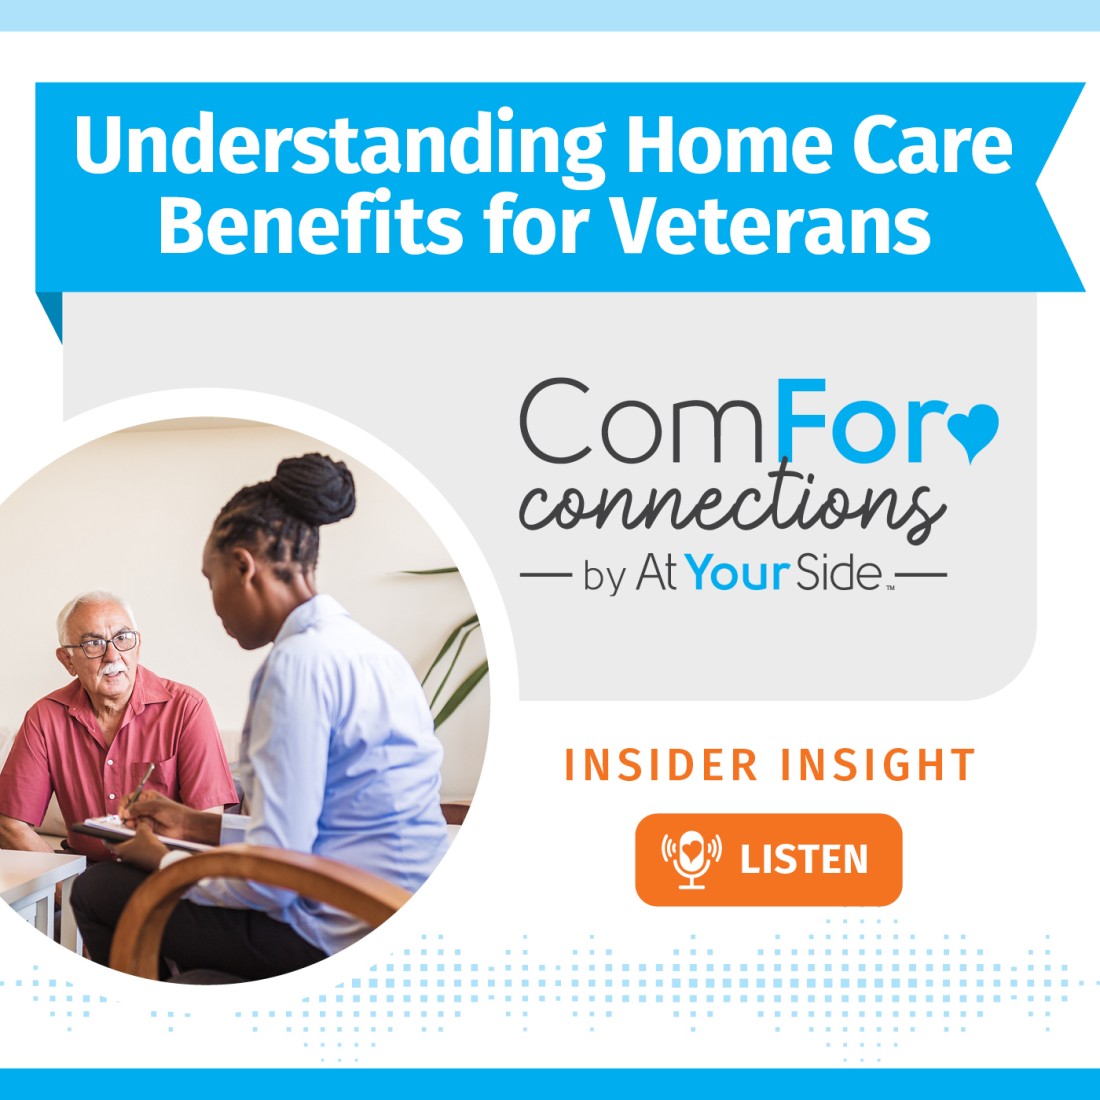 Podcast Resources: Expanding Your Home Care Knowledge - Social_Media_Graphic__Understanding_Home_Care_Benefits_for_Veterans_(1)